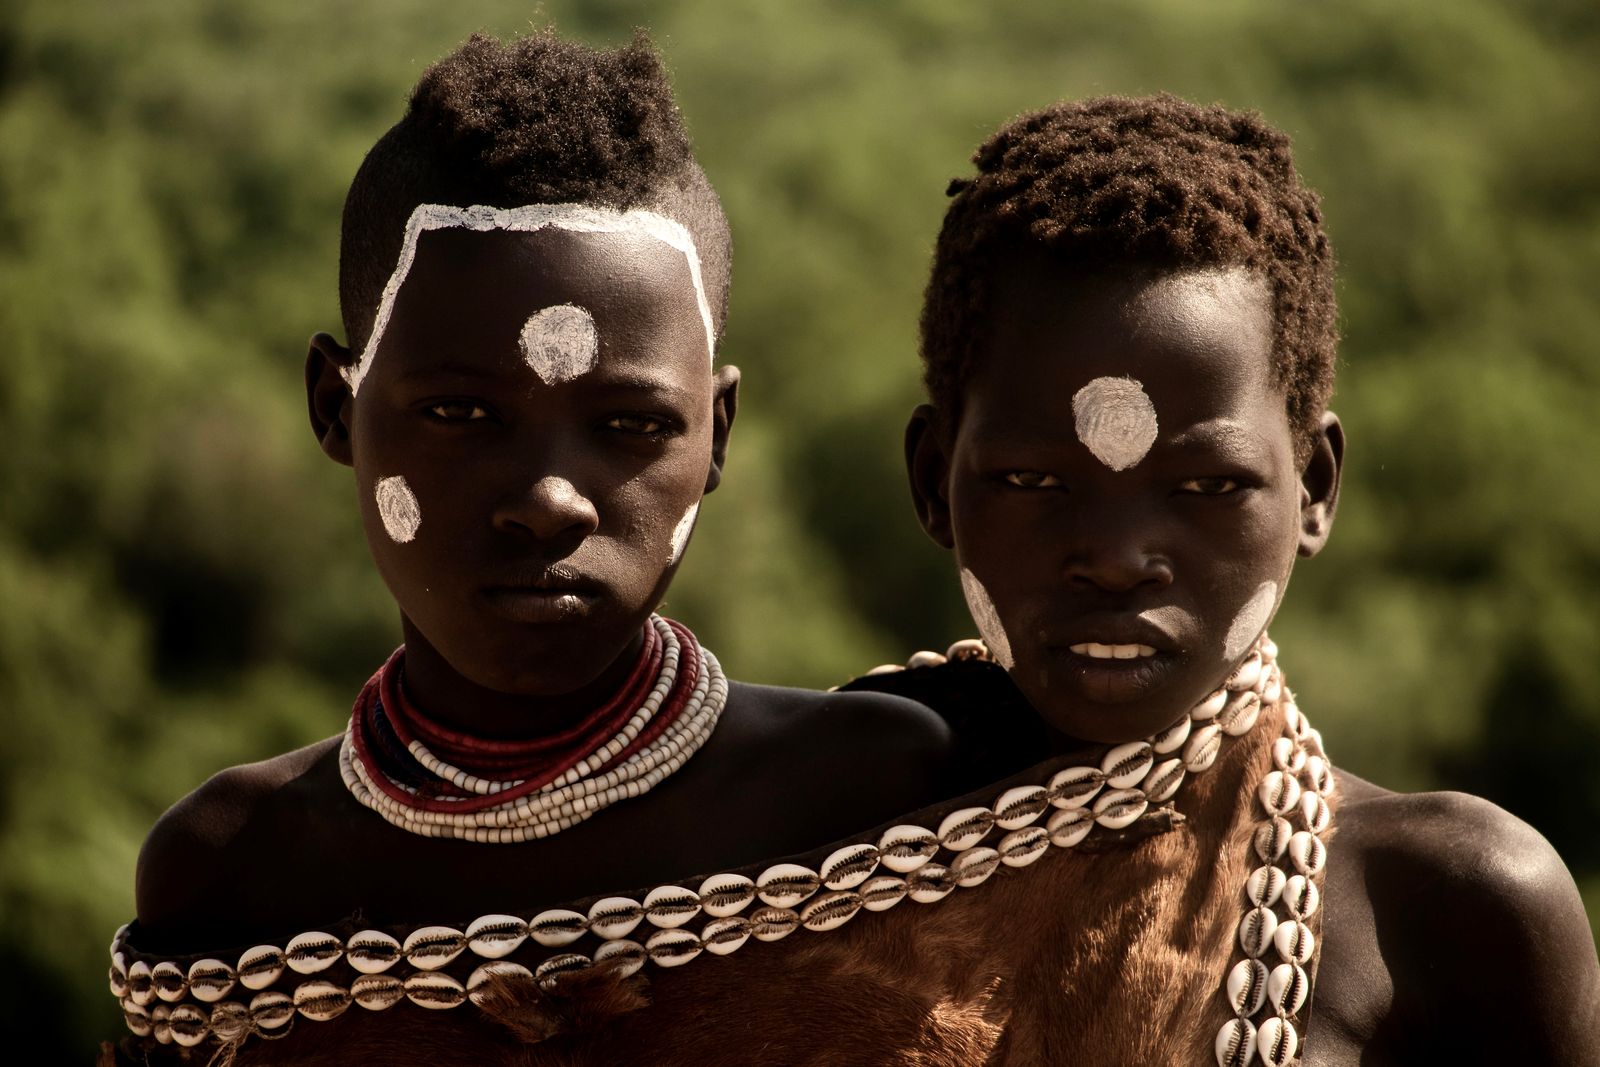 © Nwando Ebeledike - This photo was taken in Omo Valley, Ethiopia and is a photo of two brothers